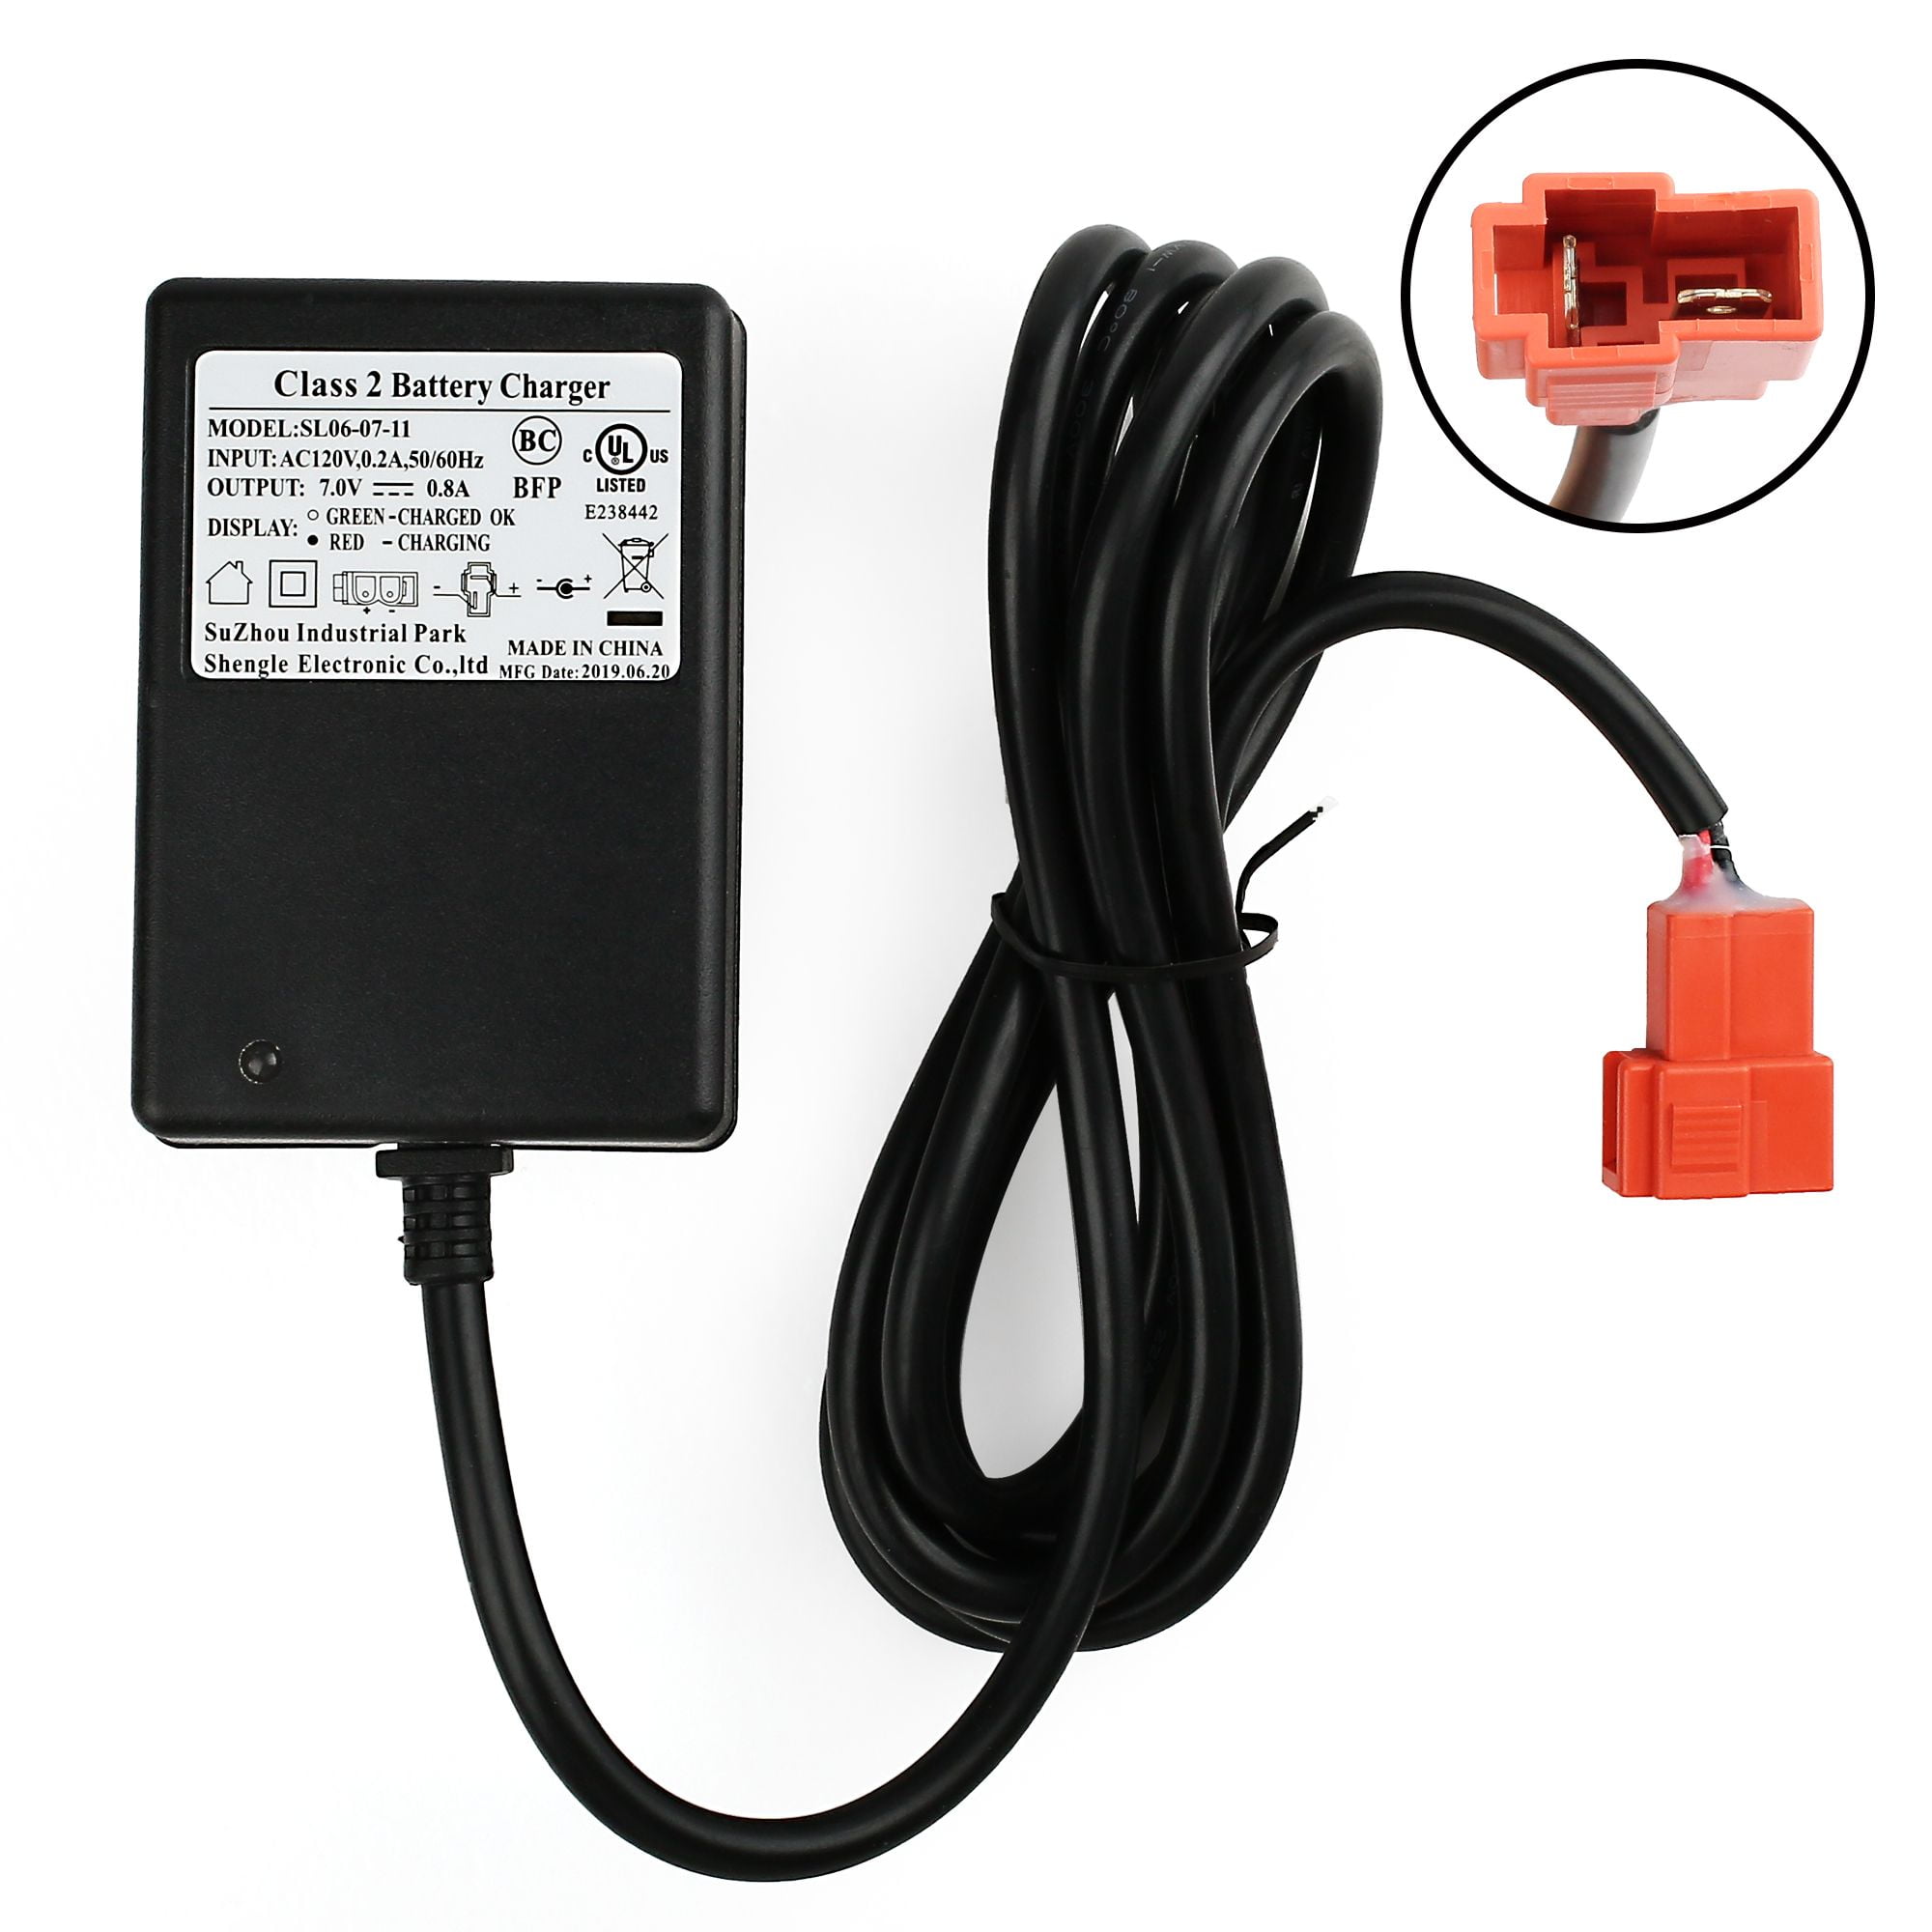 Charger AC adapter for W510AC-FCW W510AC-RFC ROLLPLAY Chevy Tahoe ride on 6VOLT 